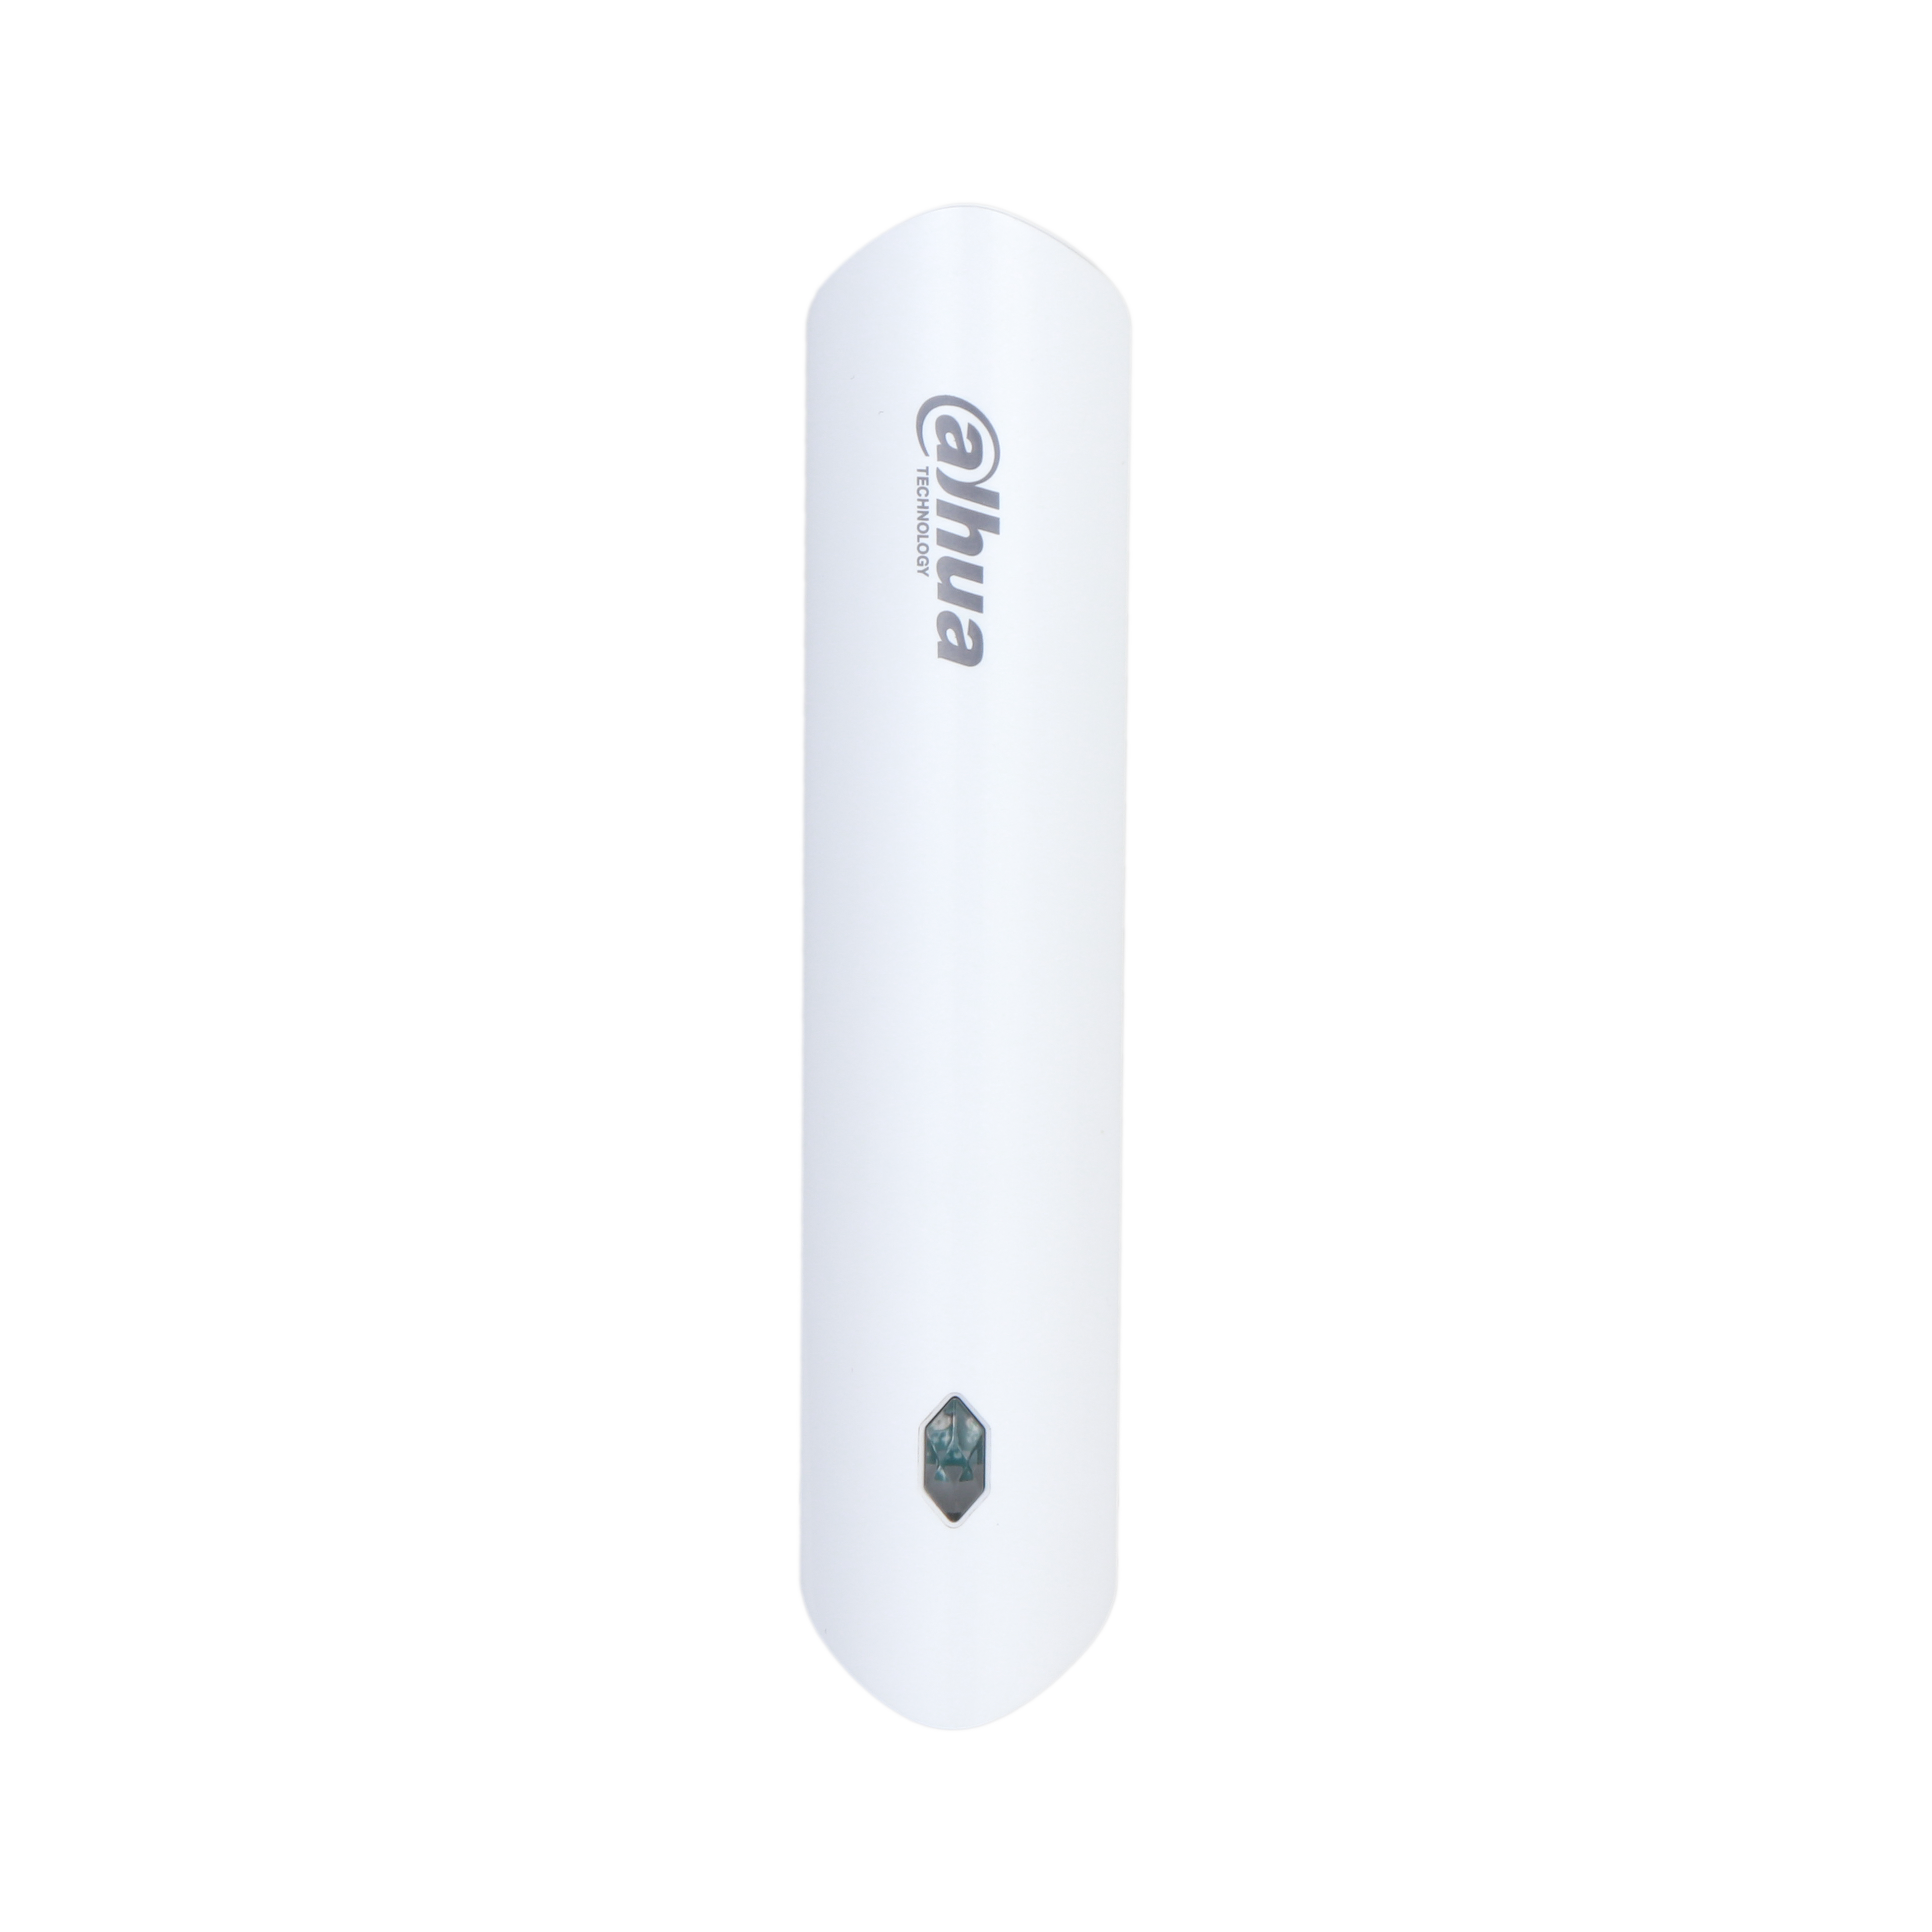 DHI-ARM310-W2 WIRELESS EXPANSION MODULE WHITE 433.1-434.6MHz WITH 1 x HARD WIRED INPUT PLASTIC WALL MOUNTED 1 x BATTERY CR123A BATTERY LIFE 2-4 YEARS